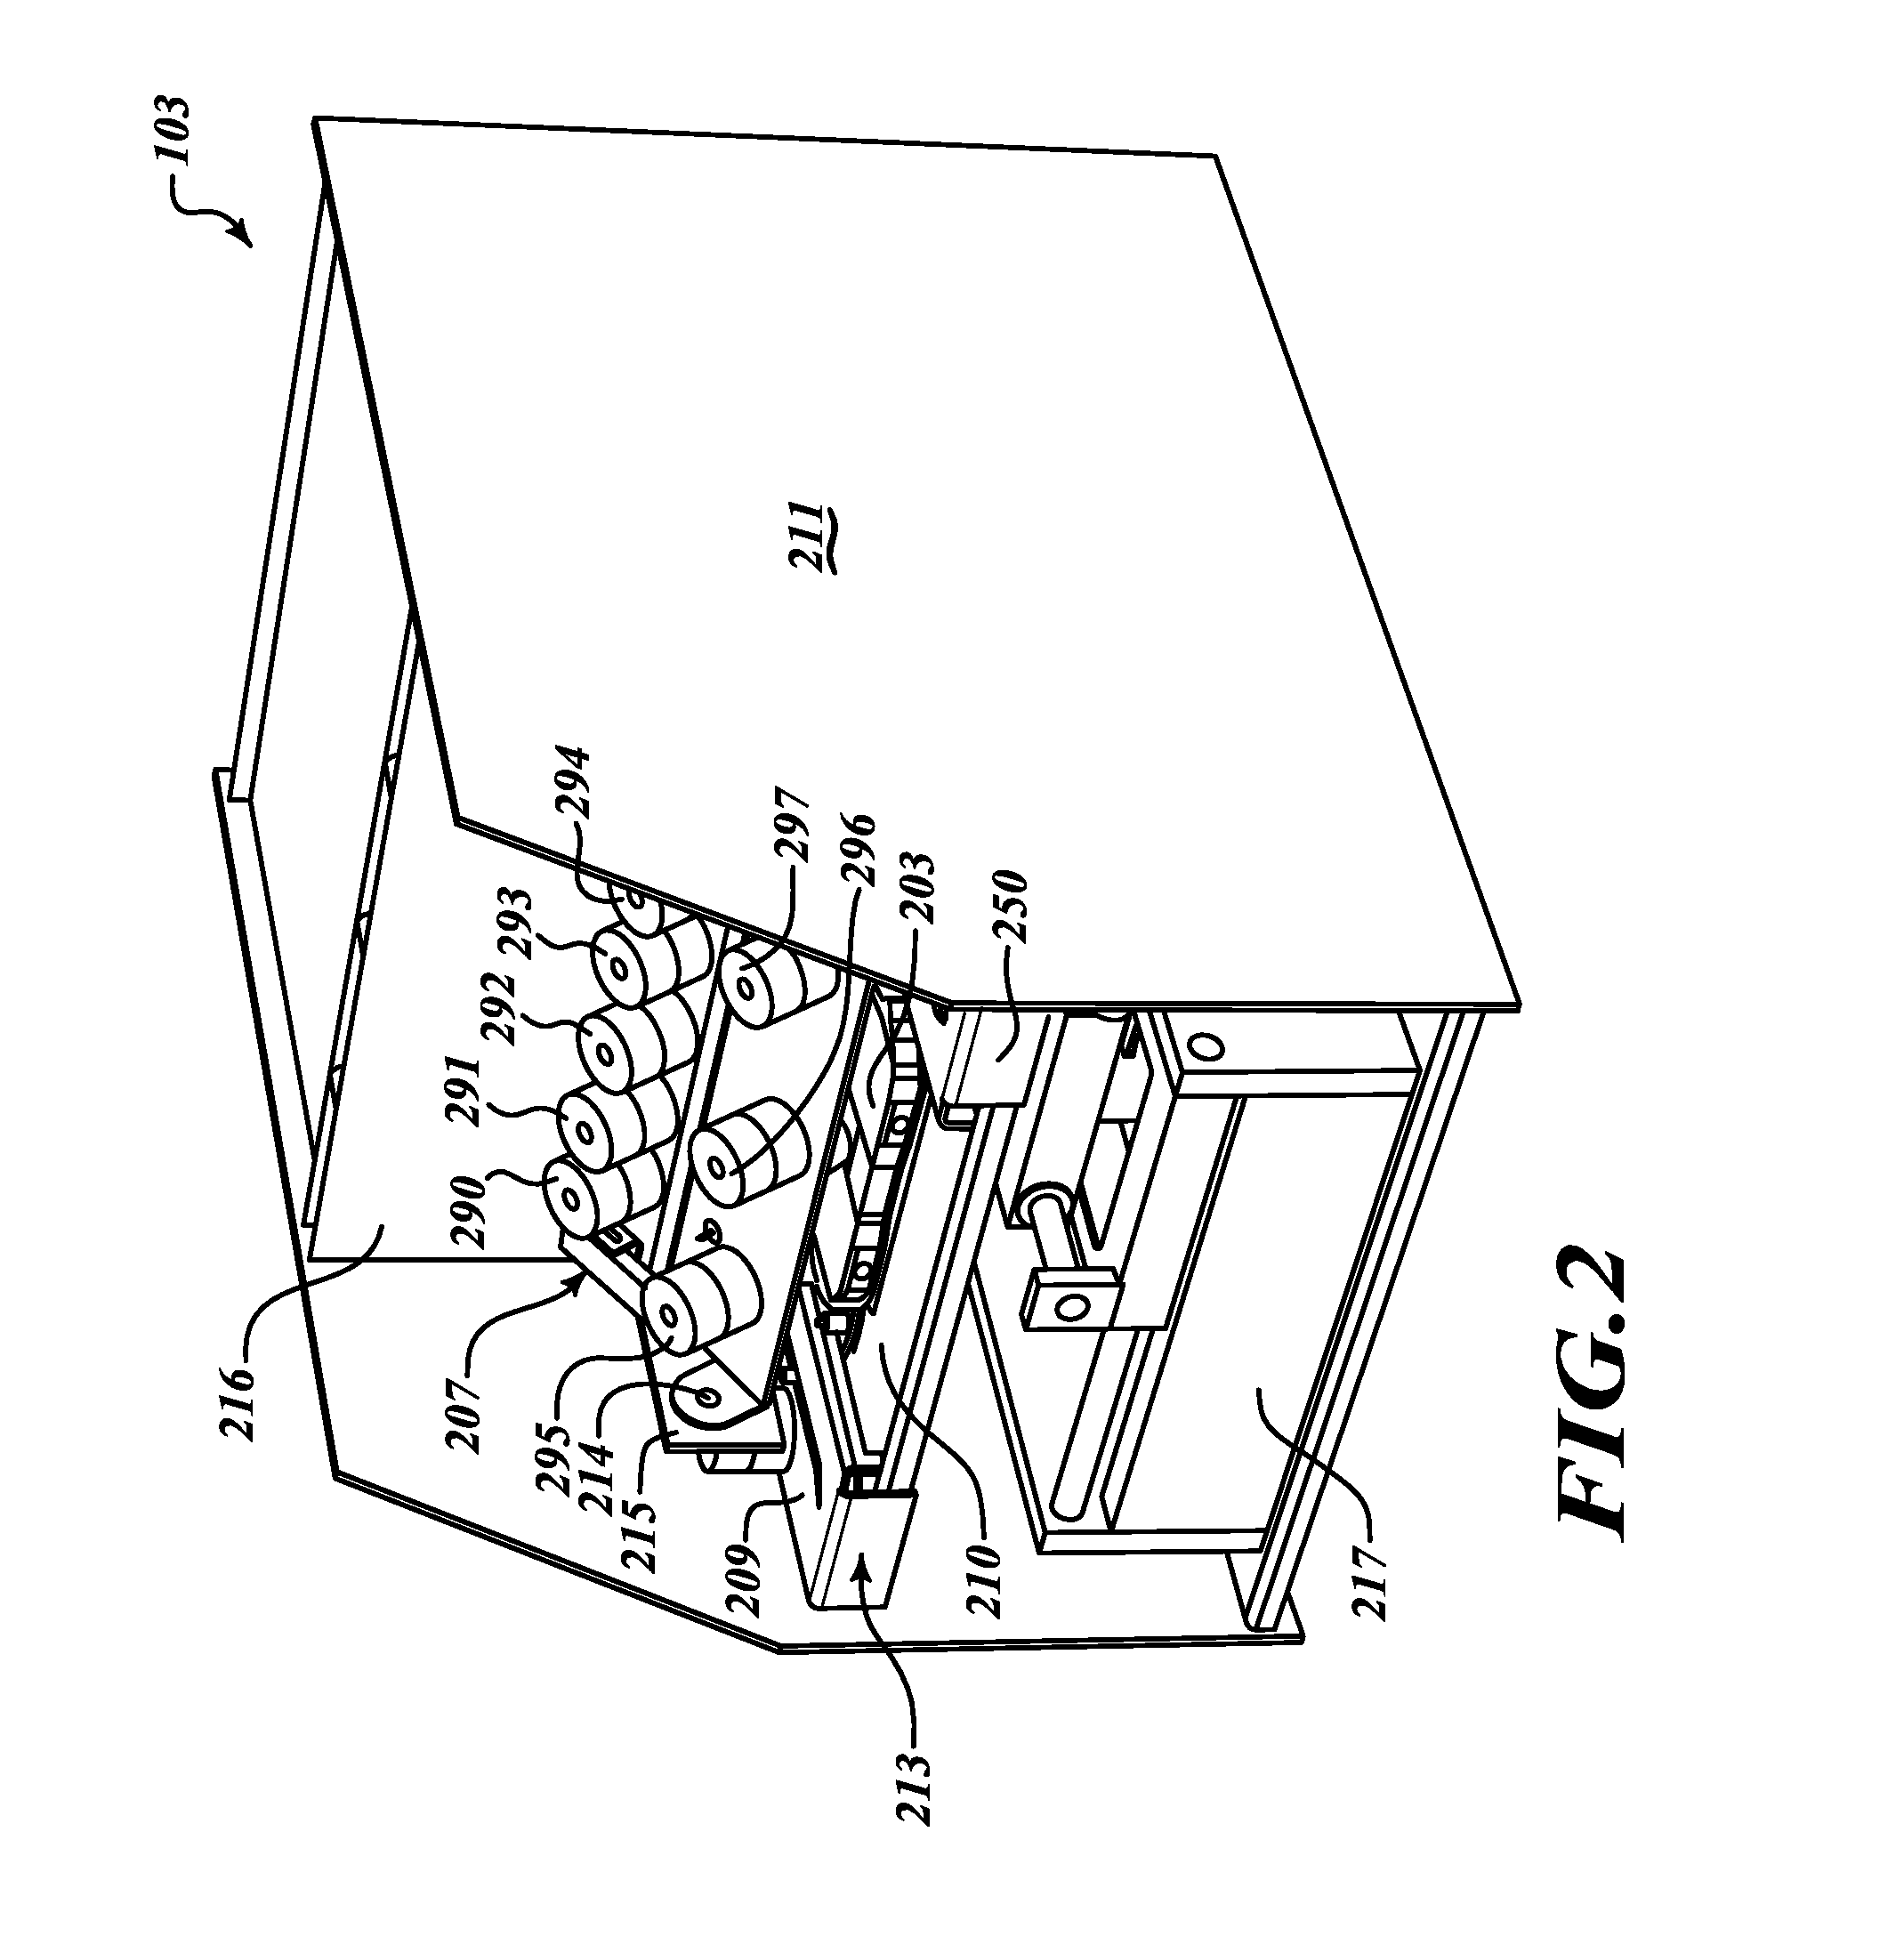 Culture systems, apparatus, and related methods and articles